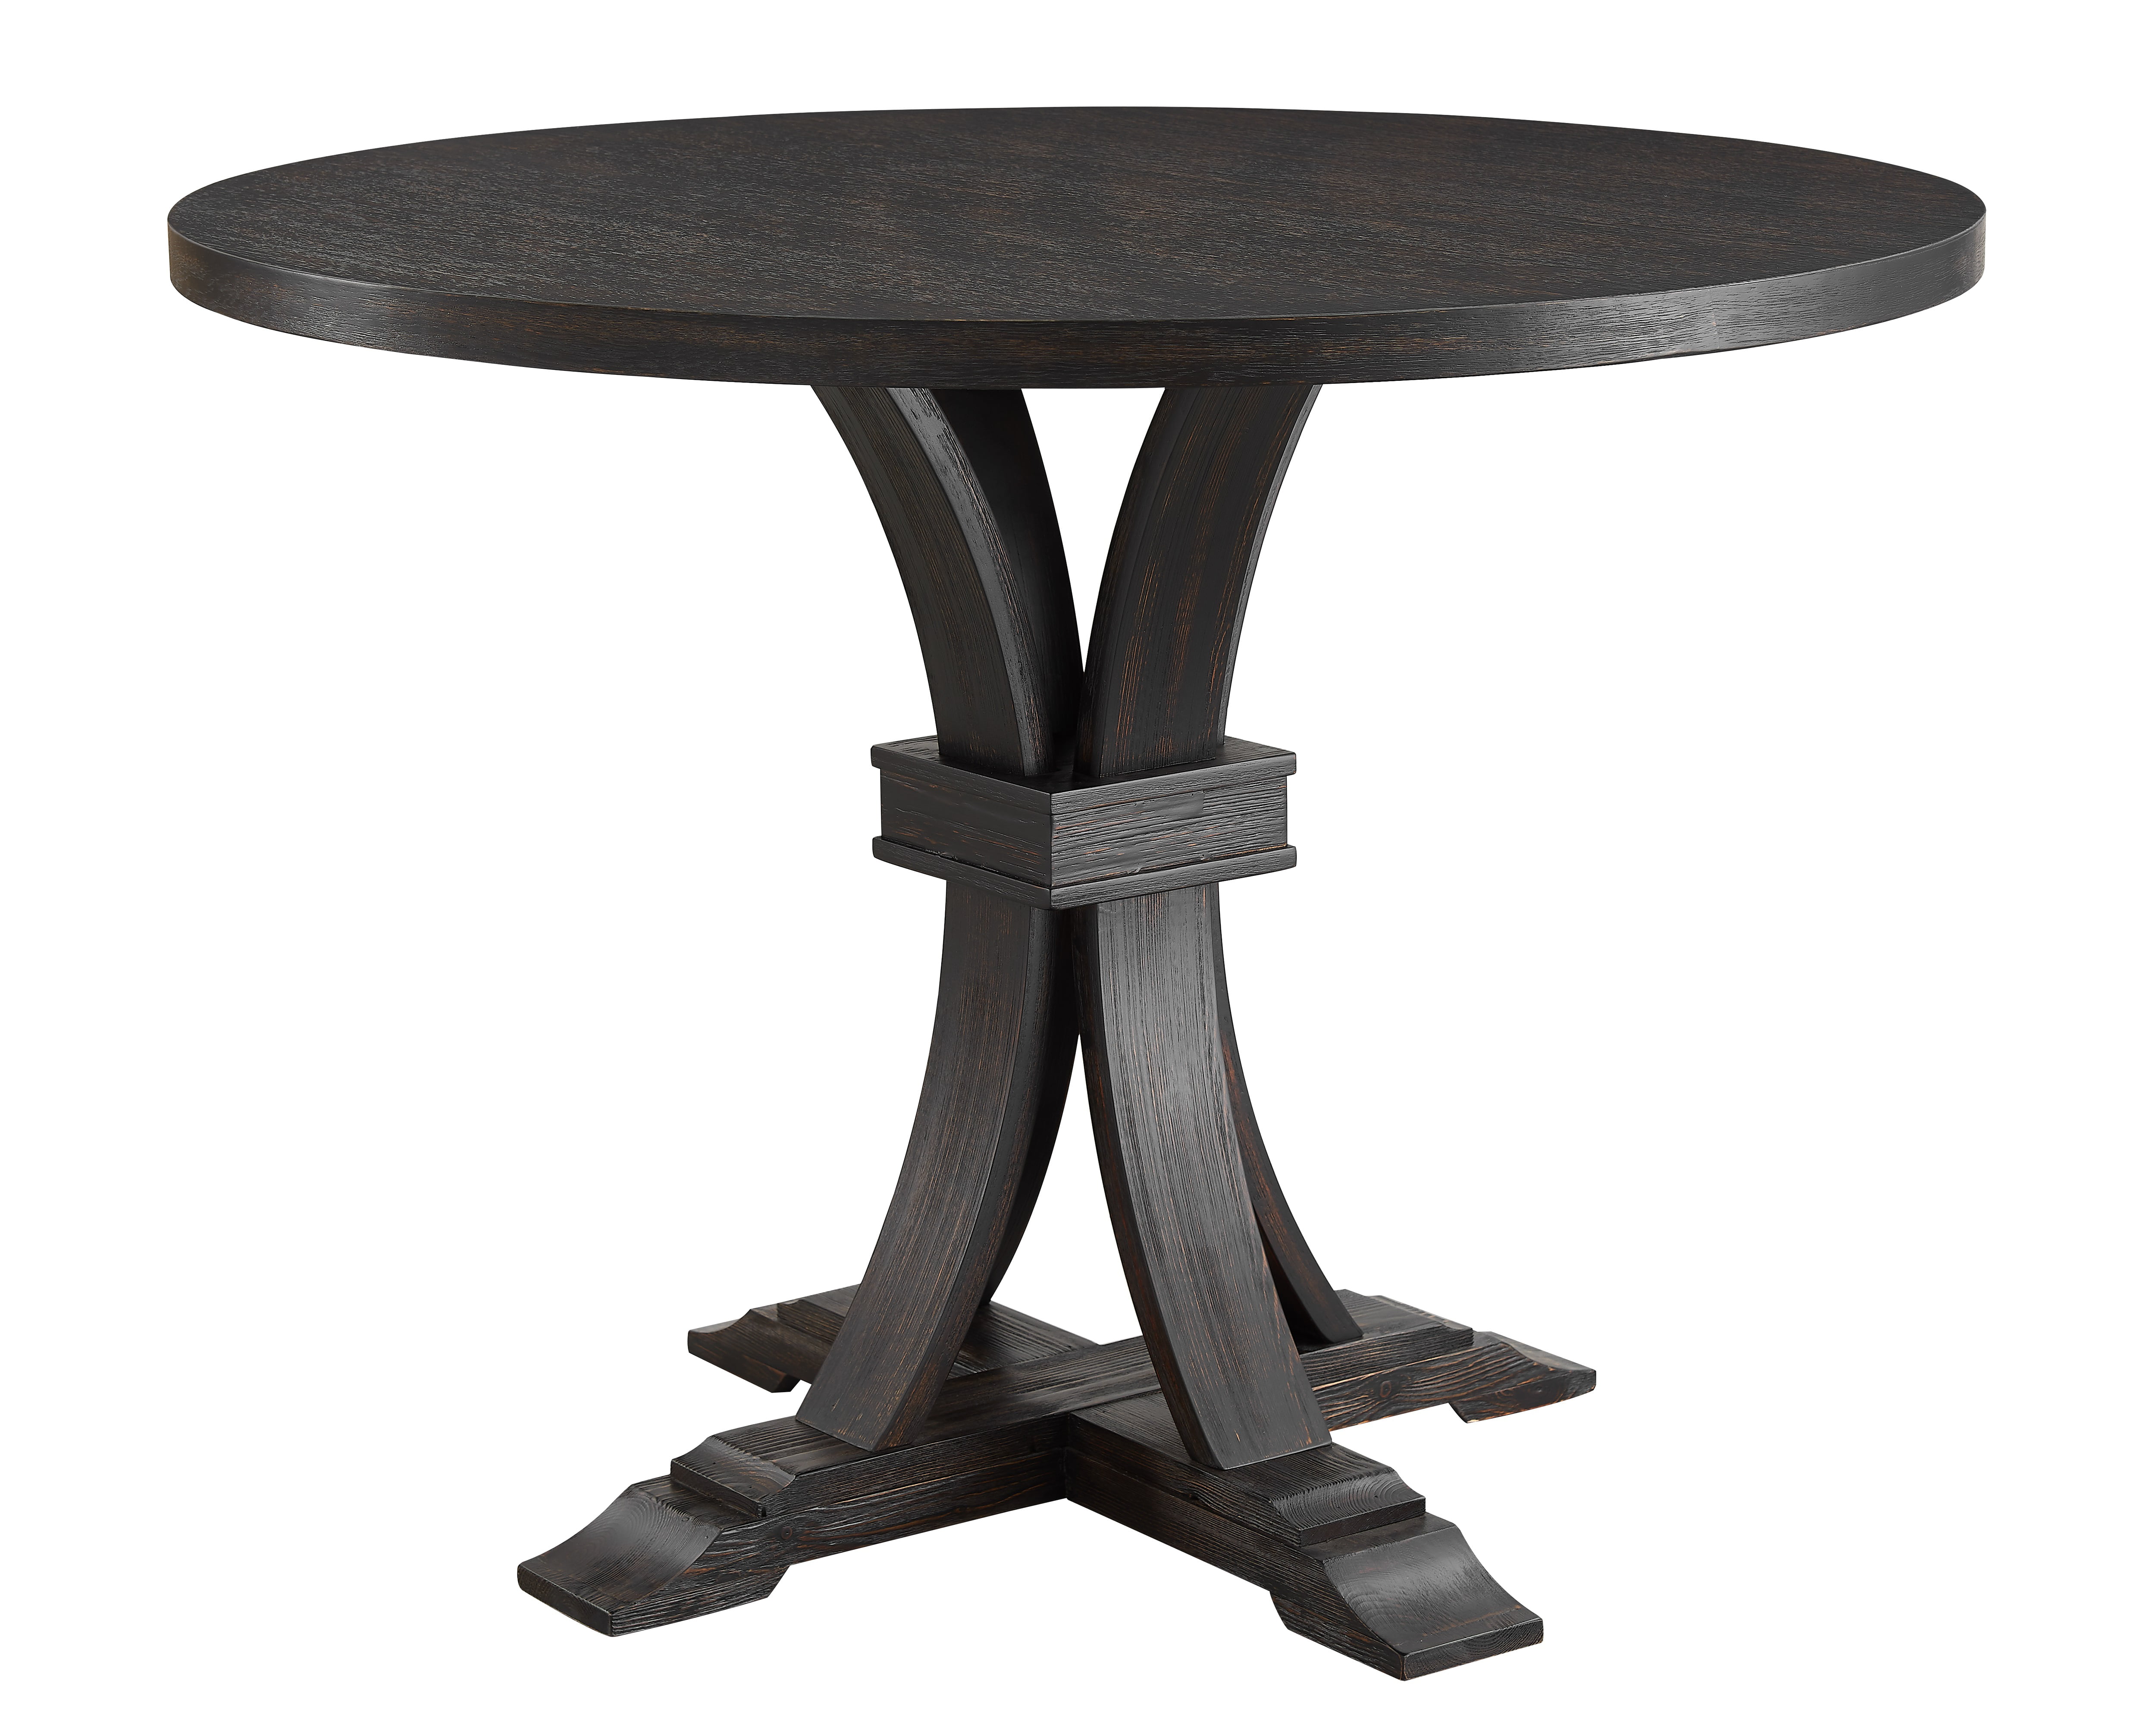 Black Wood Round Dining Table